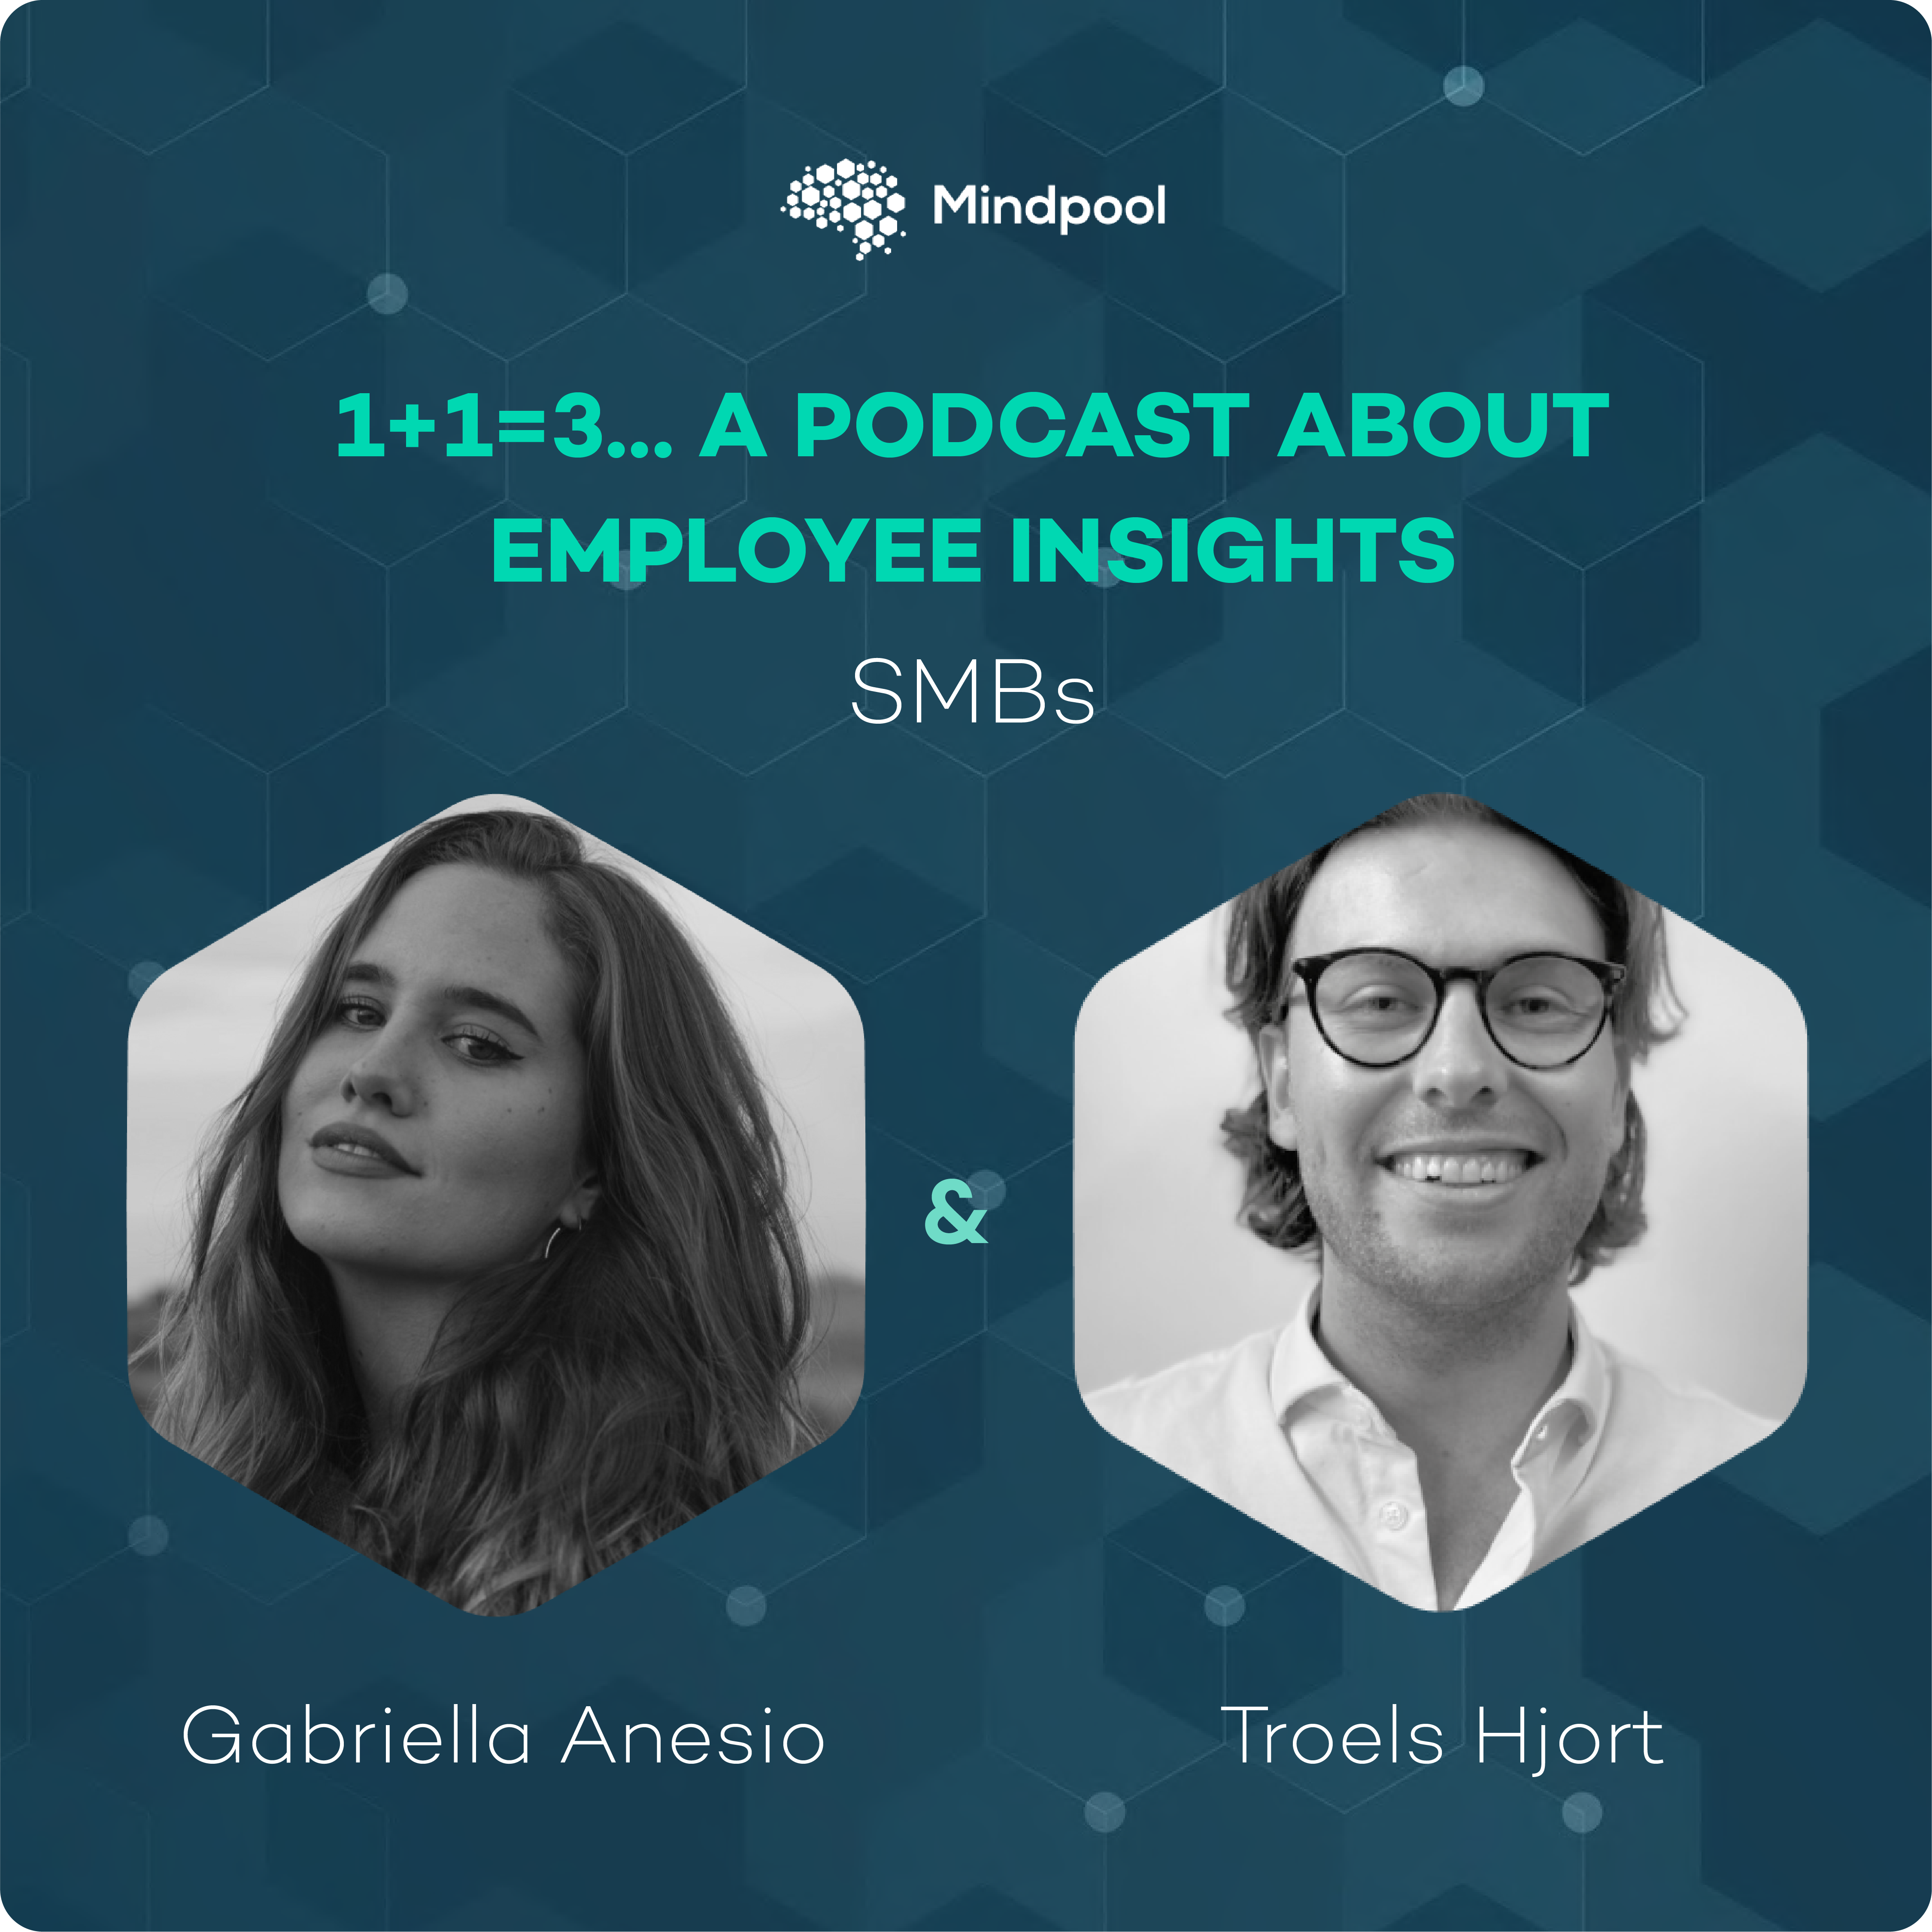 <p>1+1=3: A podcast about employee insights #2</p>